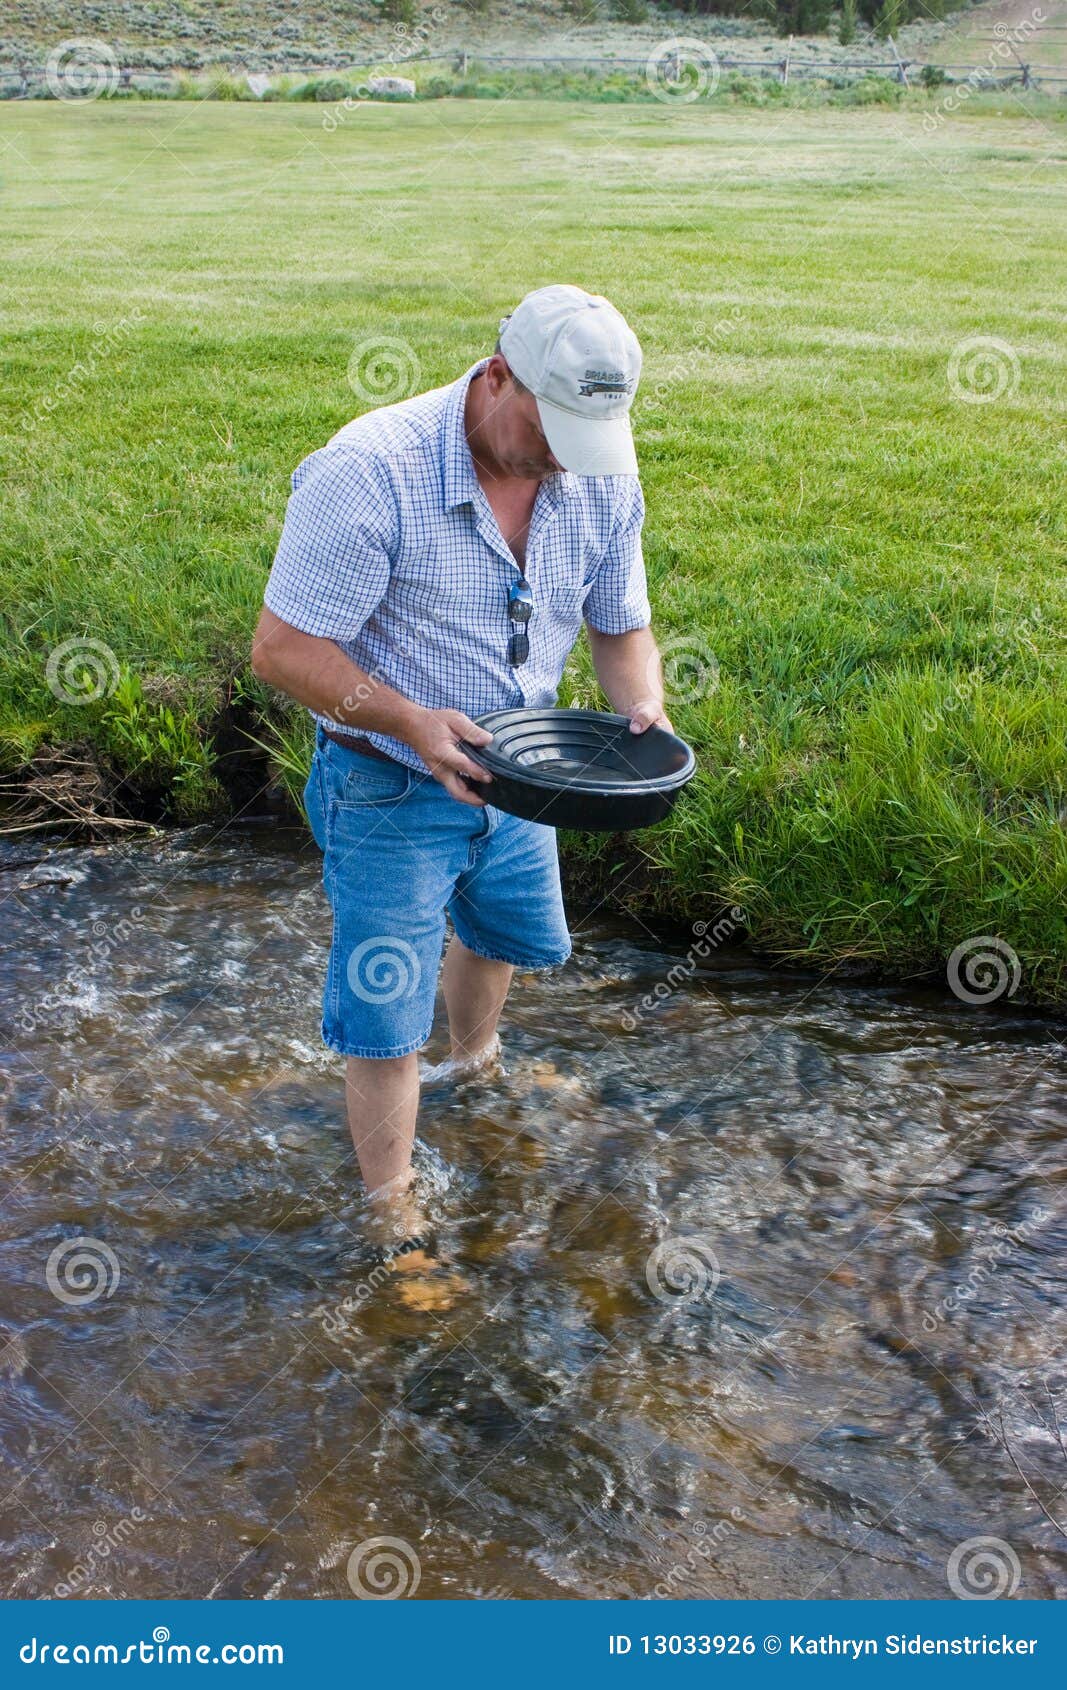 man panning for gold